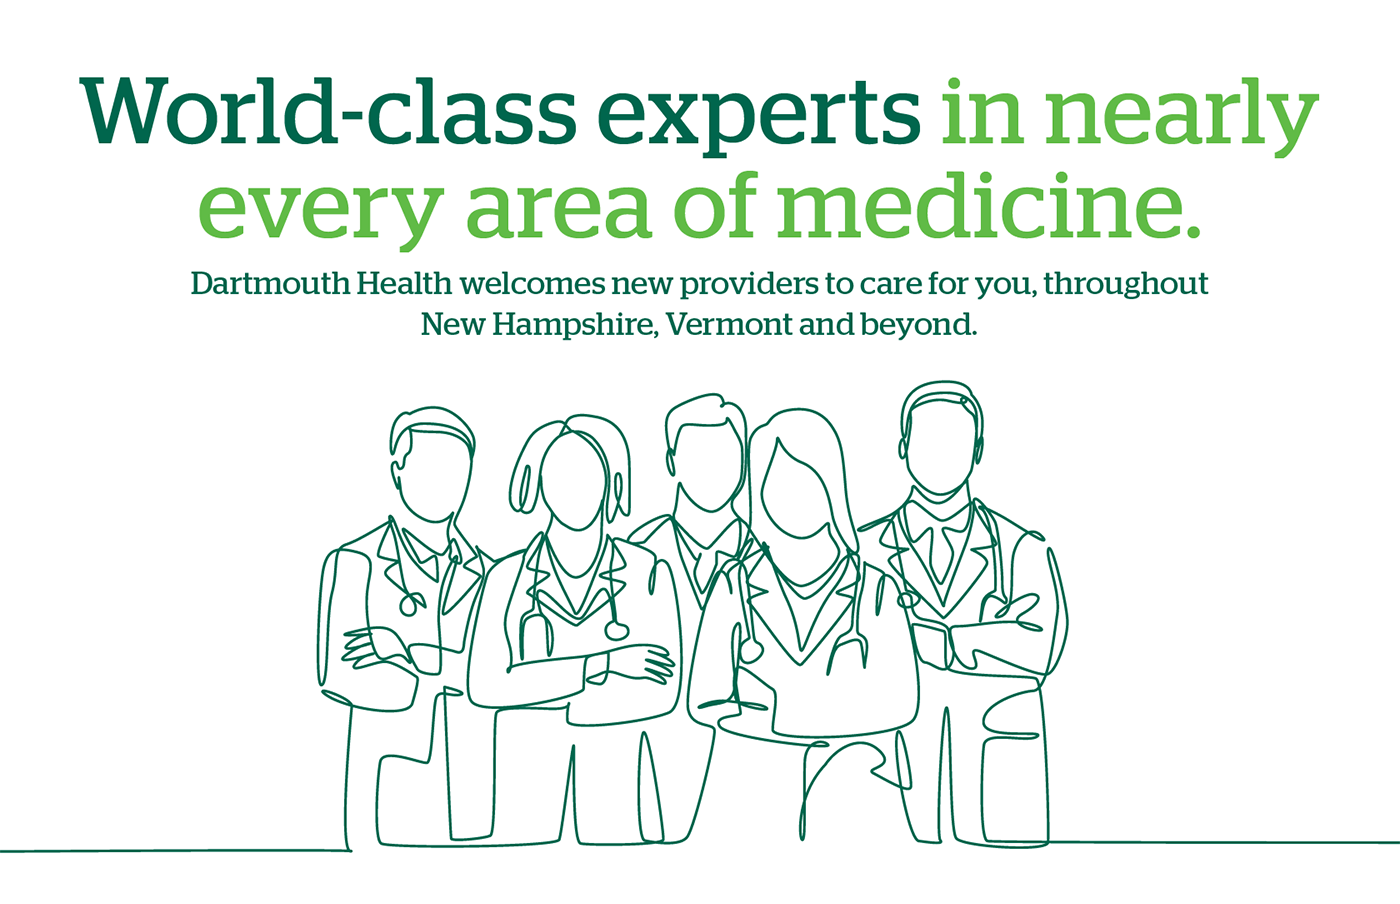 Dartmouth Health welcomes new providers from diverse healthcare backgrounds to its team